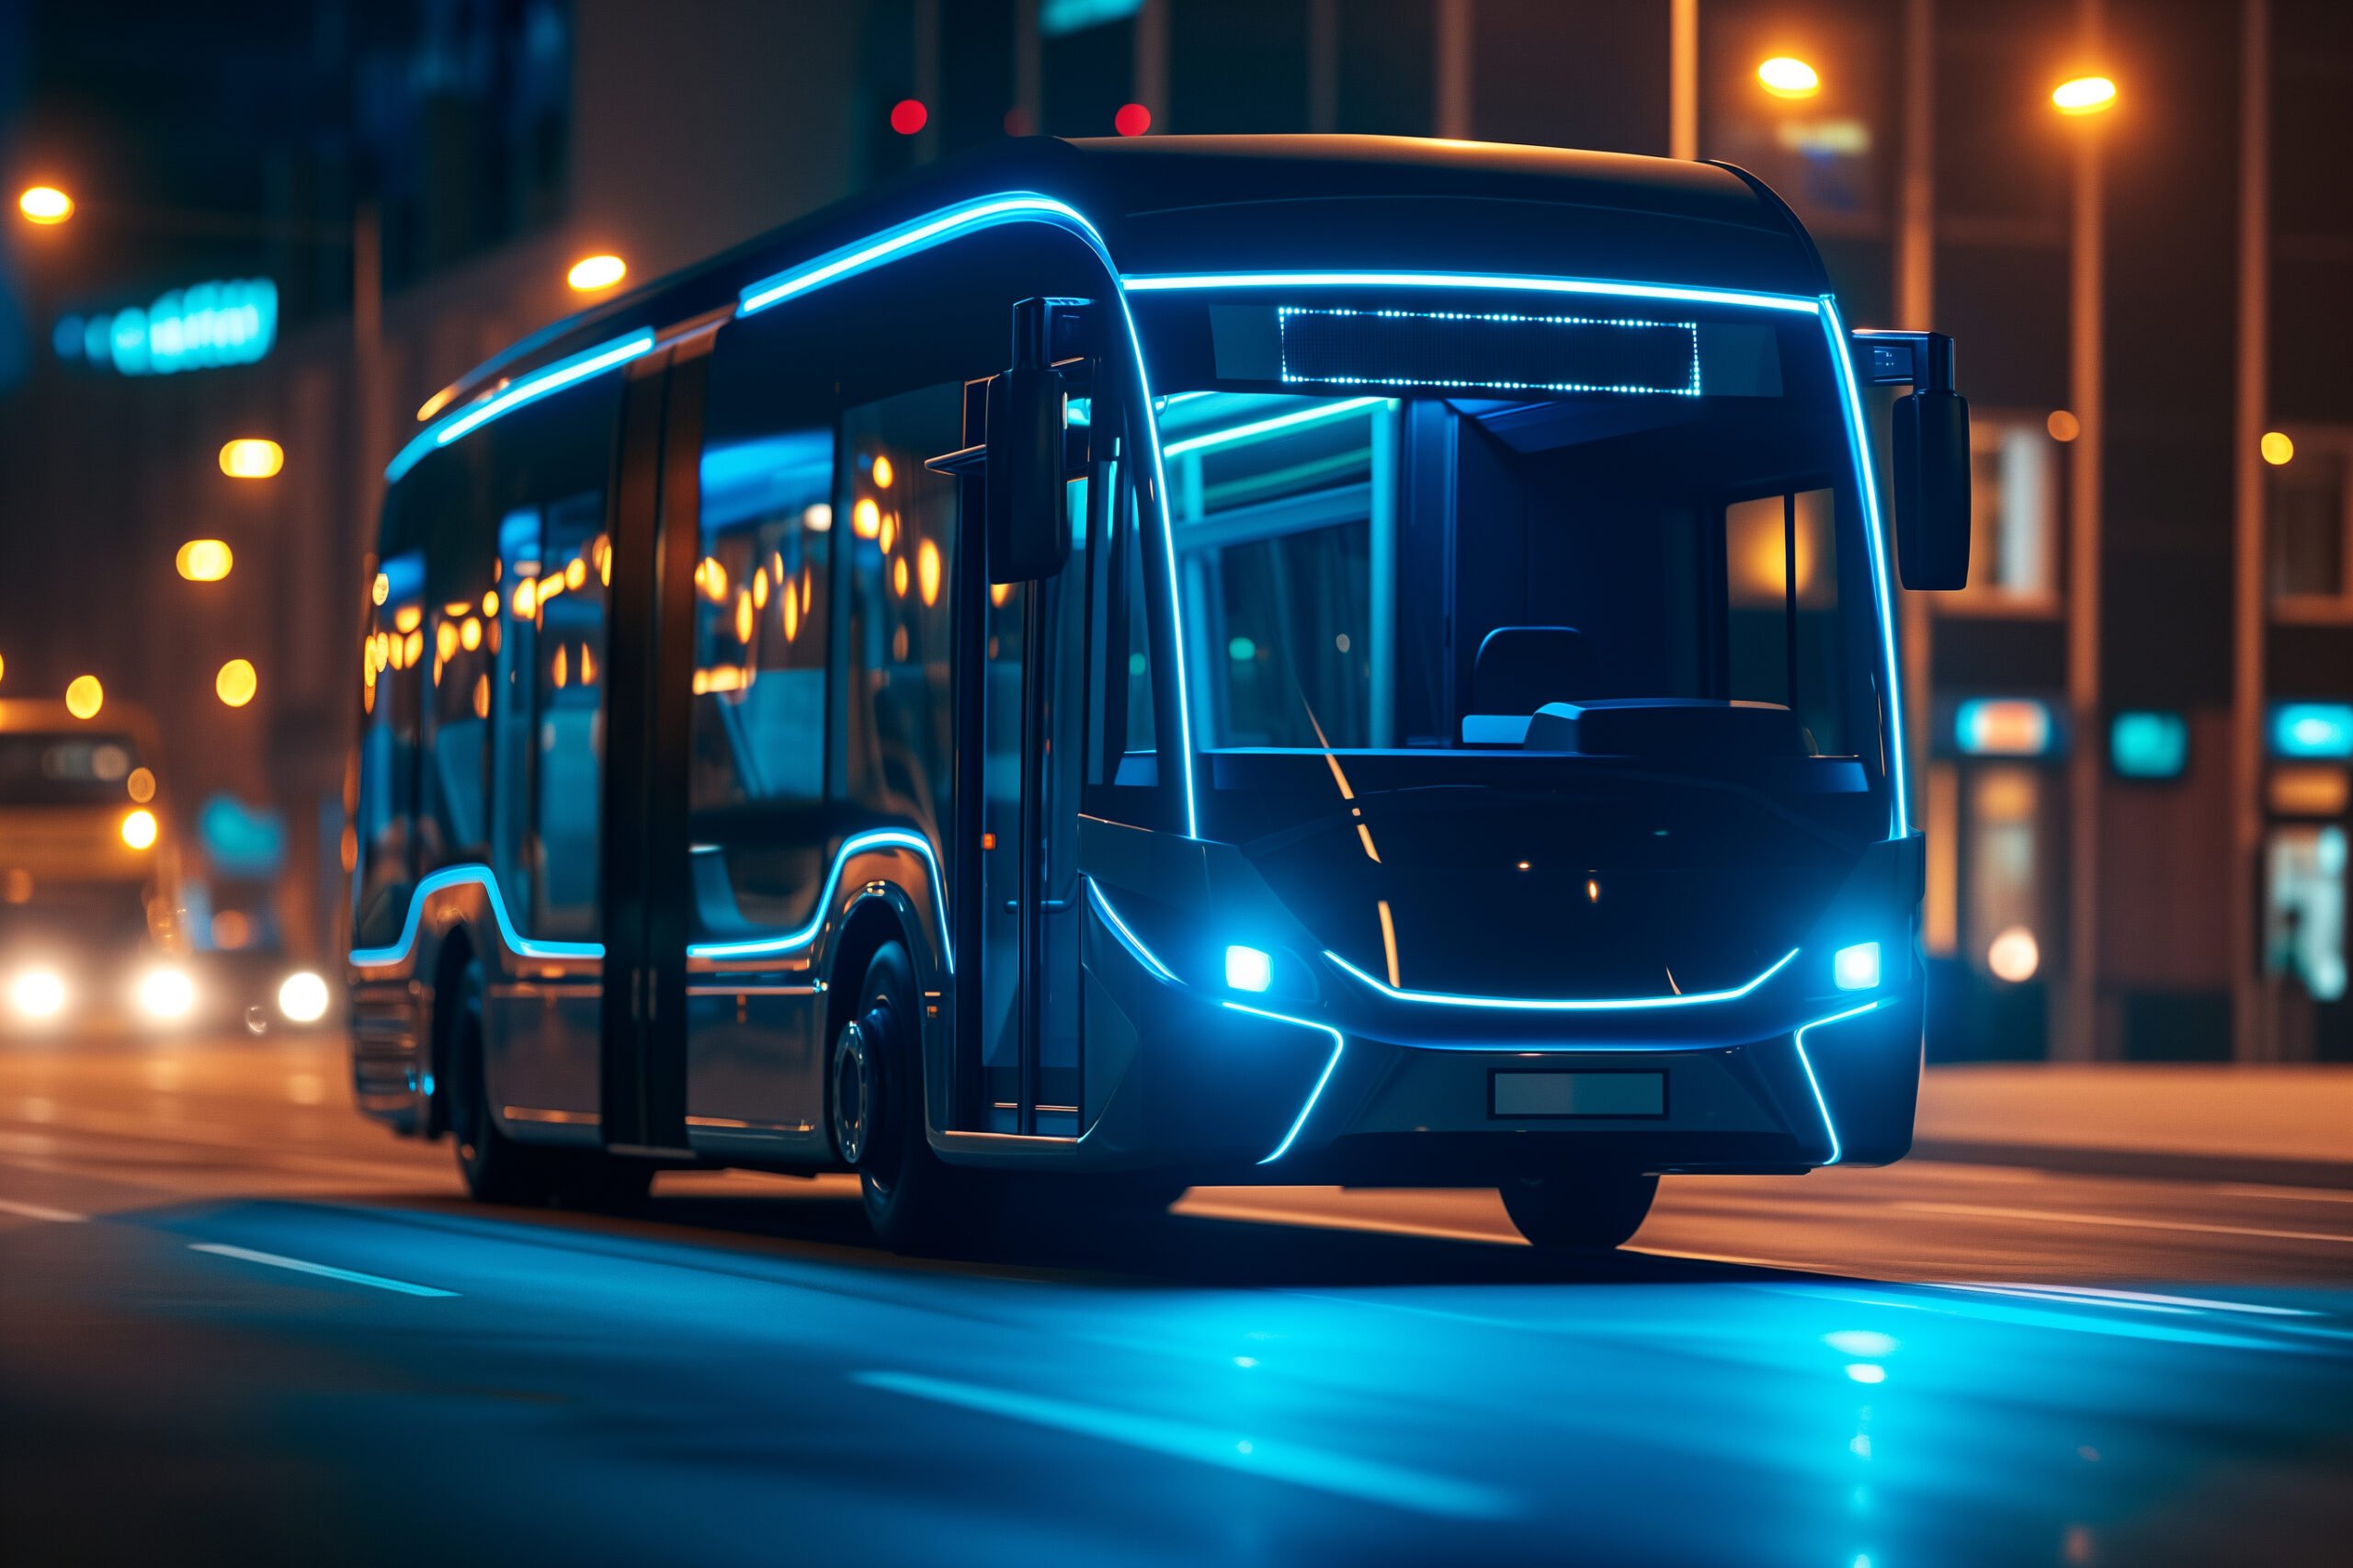 Could AI Have Prevented the Houston Metro Bus Incident?